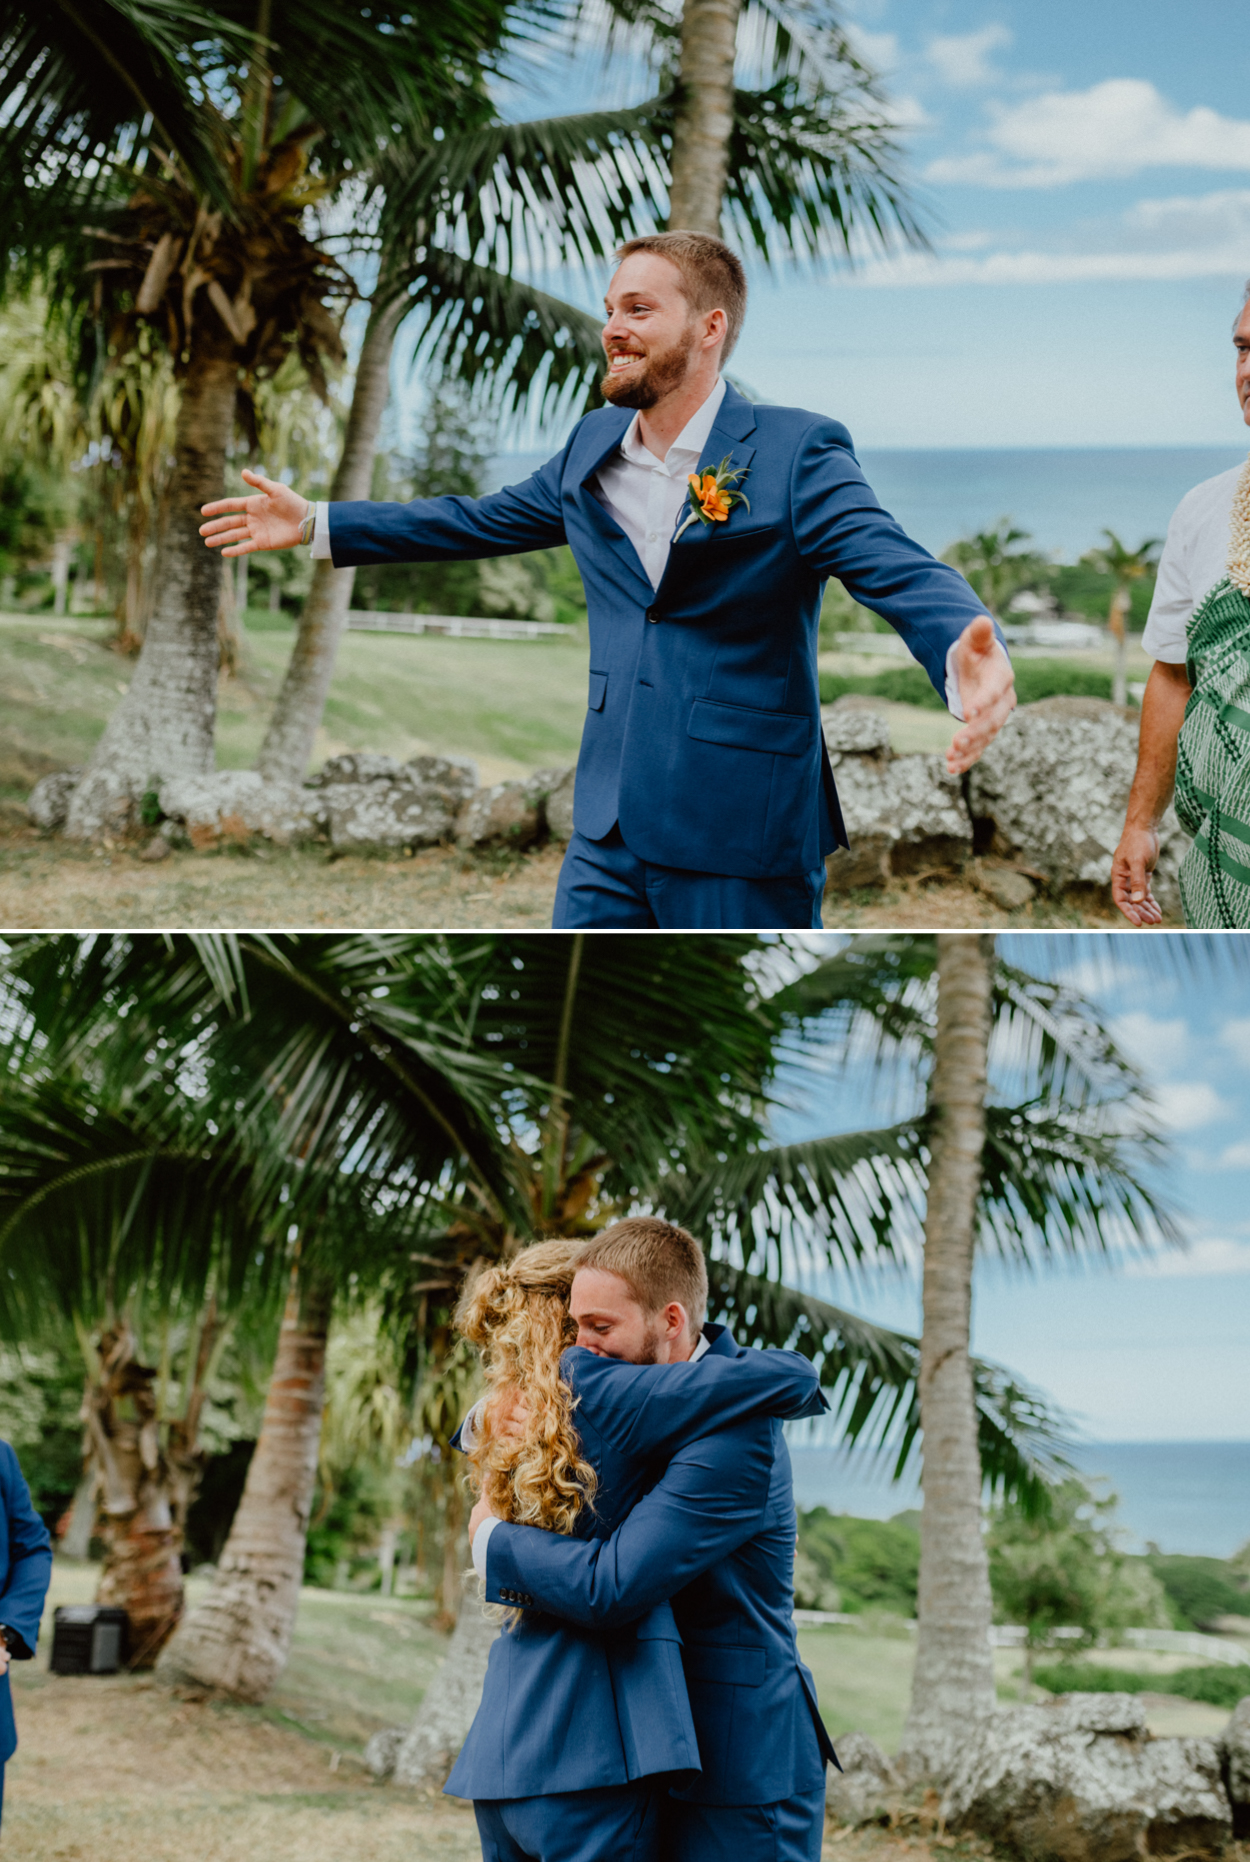 Groom embracing his brother before the wedding ceremony in Paliku Gardens  Jurassic Park Themed Wedding